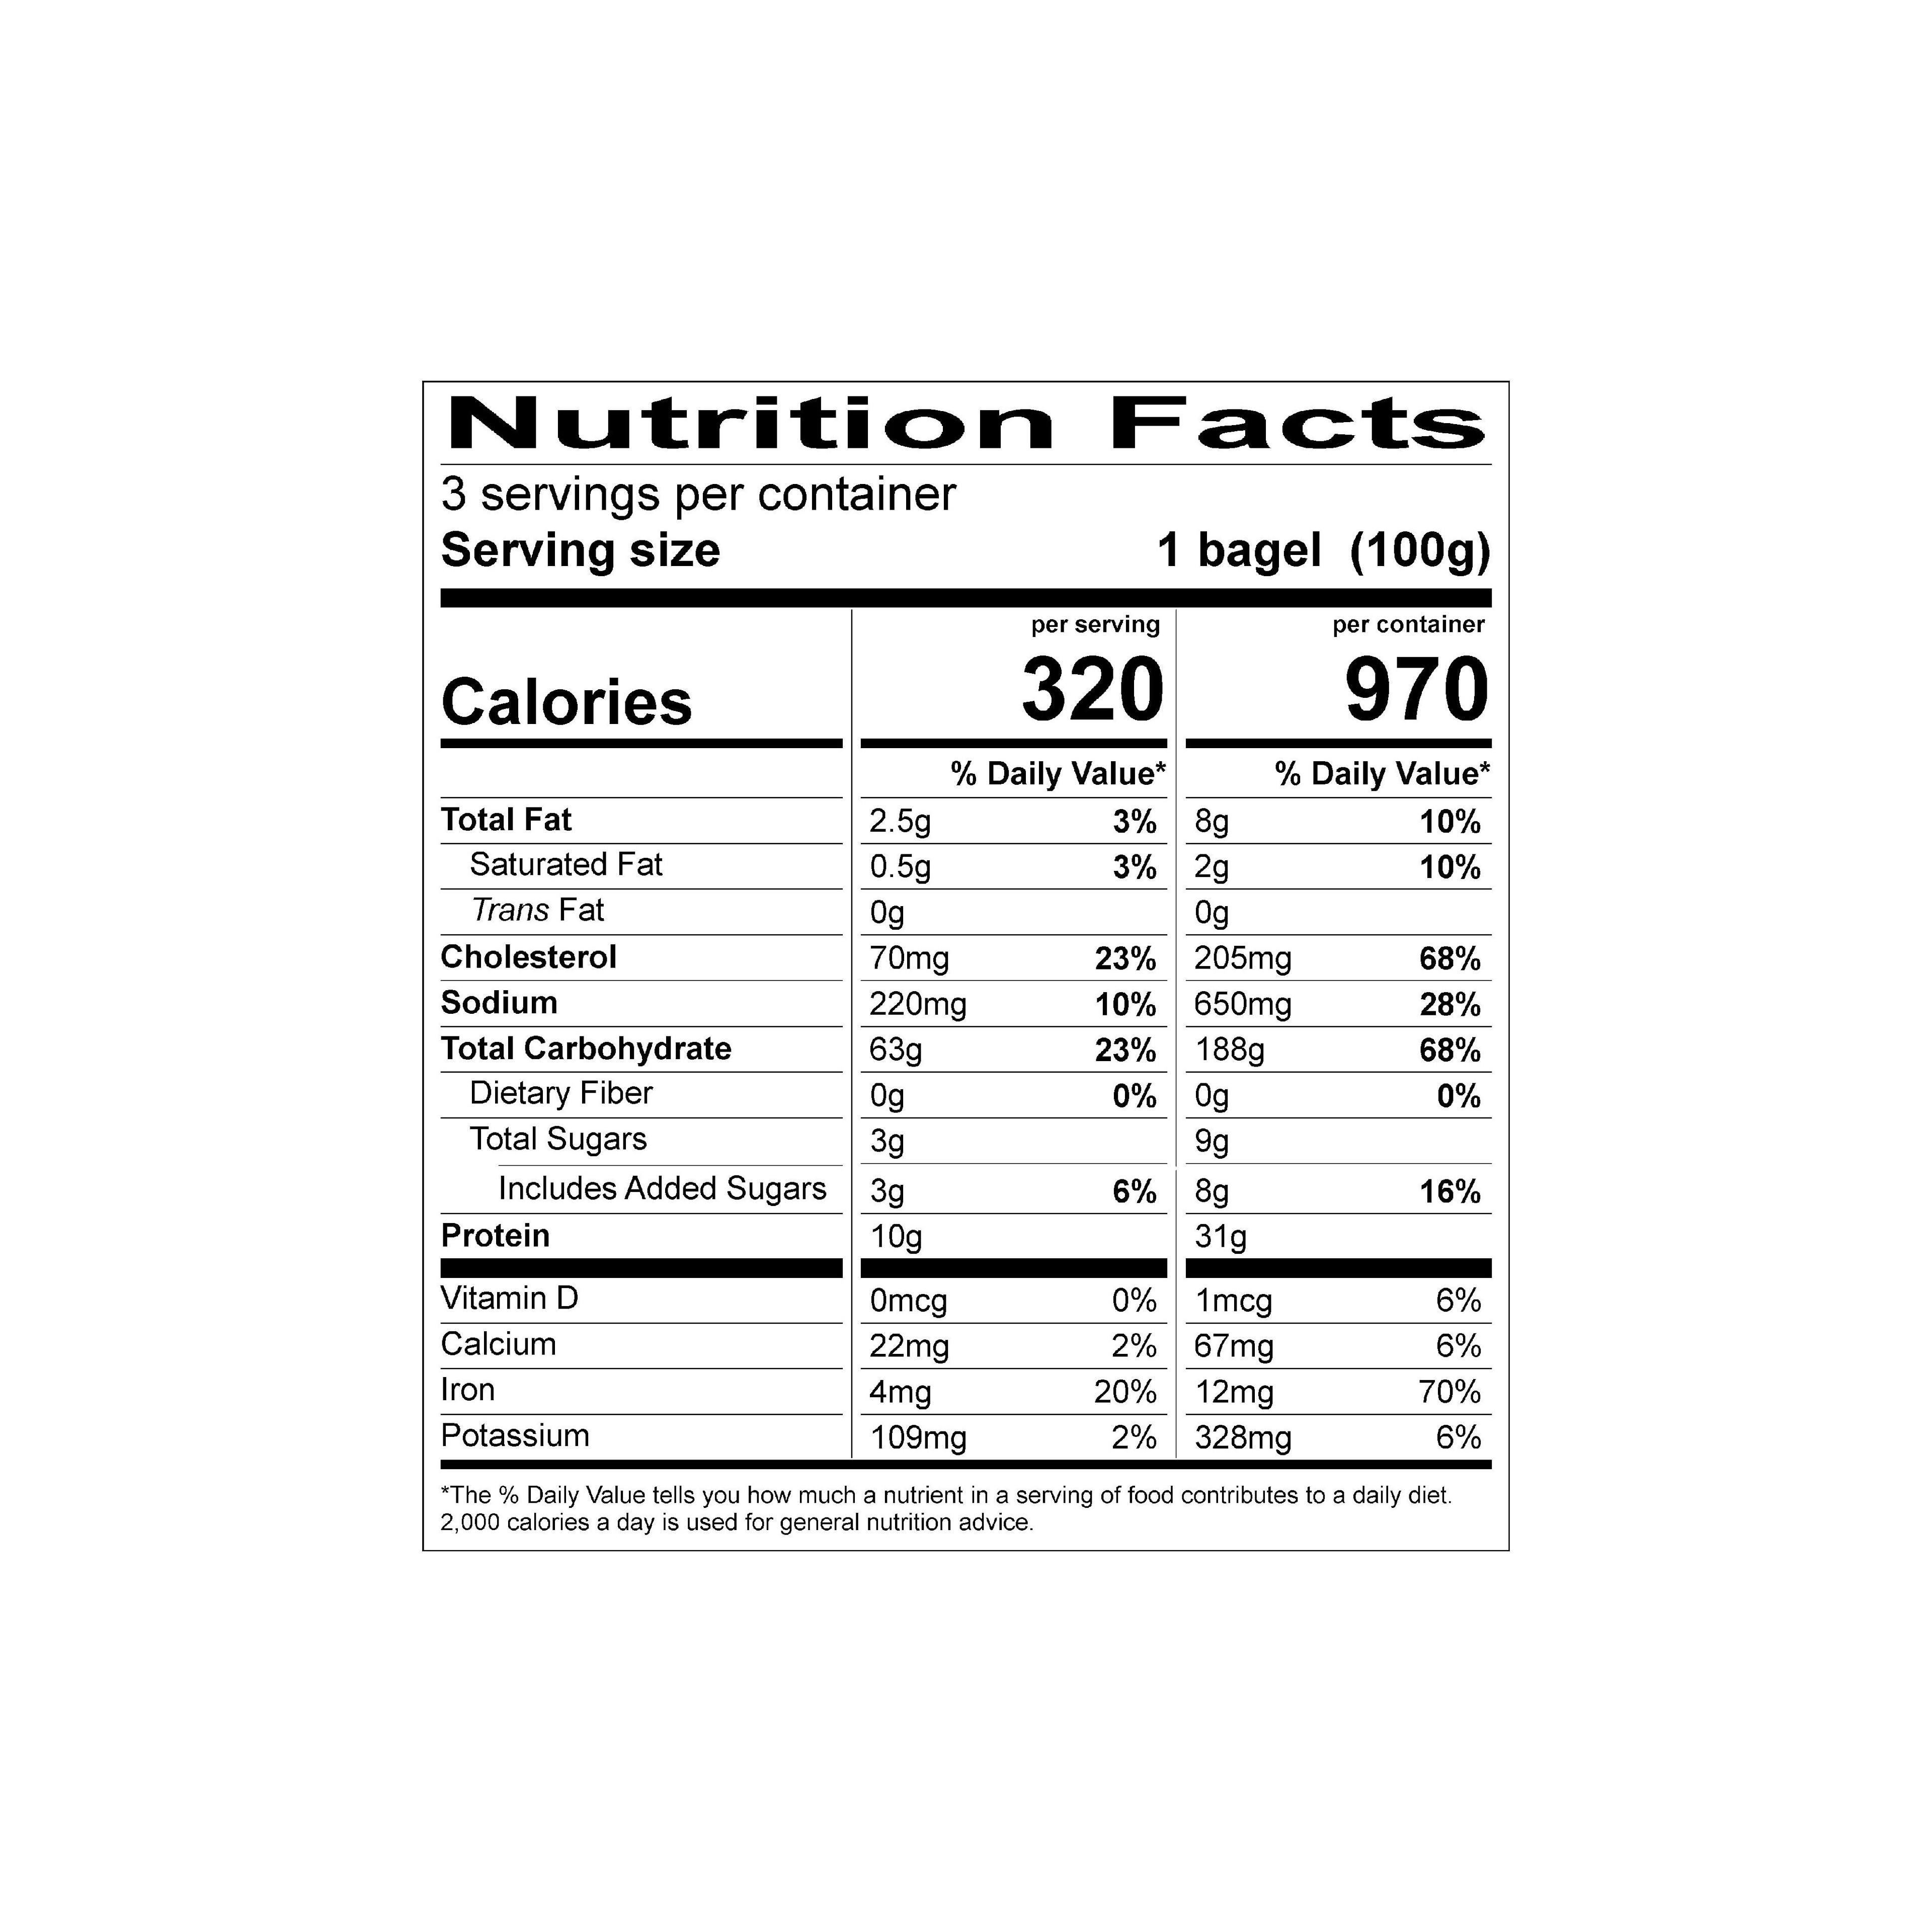 Making Sense of FDA’s New Dual-Column Nutrition Facts Label Requirement for 2-3 Servings